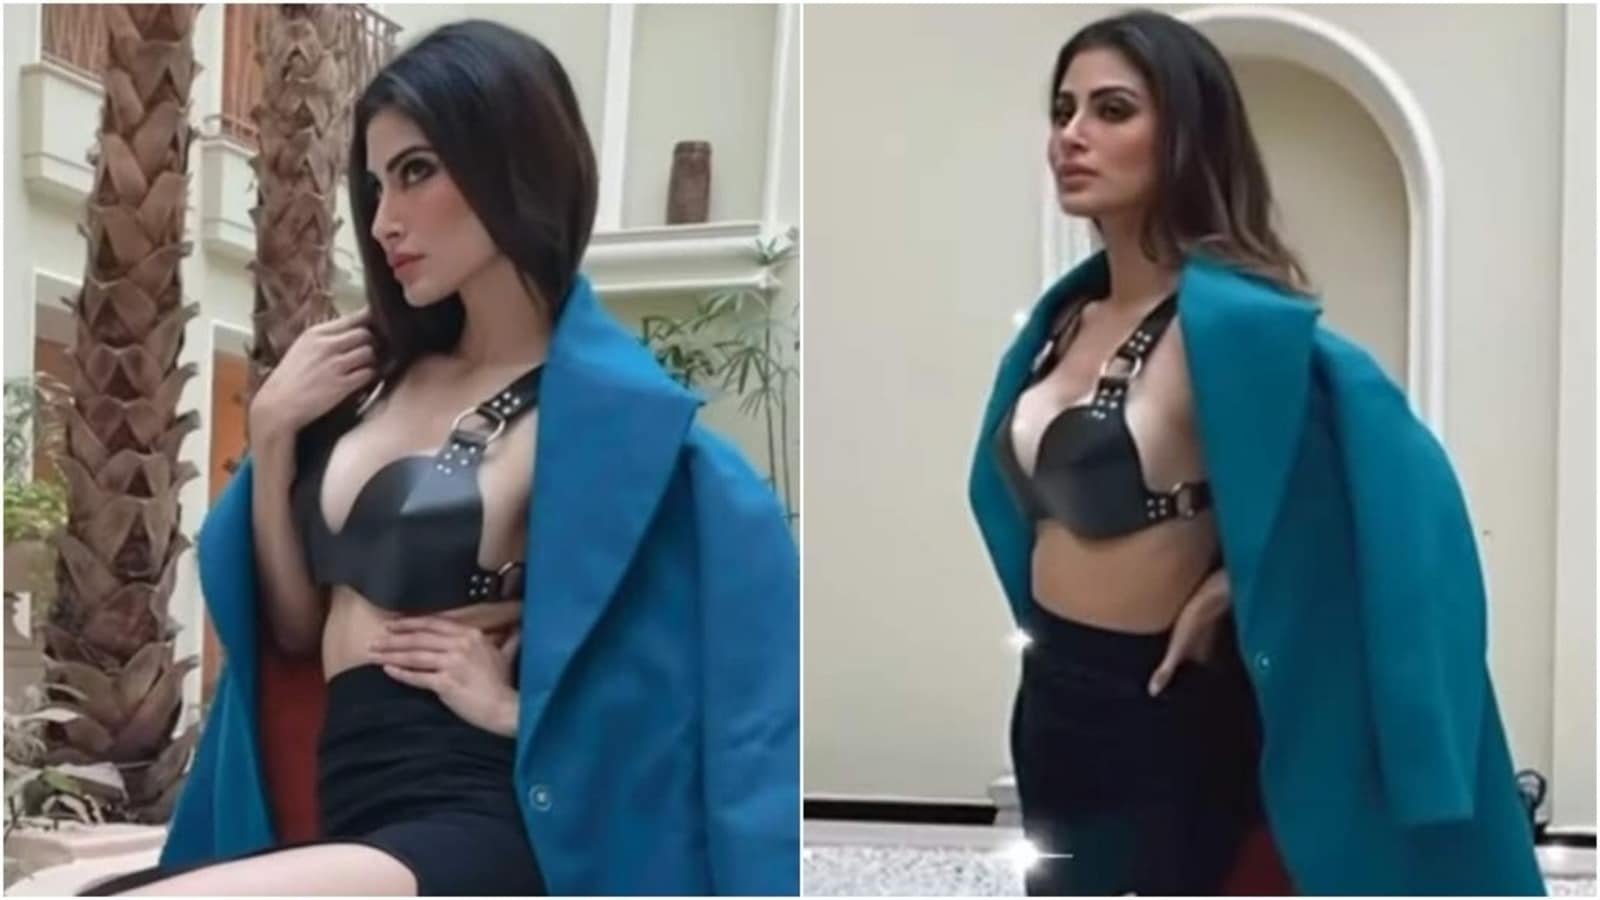 Nude Mouni Roy - Mouni Roy is sensational in leather bralette and thigh-slit skirt in BTS  video from shoot | Fashion Trends - Hindustan Times